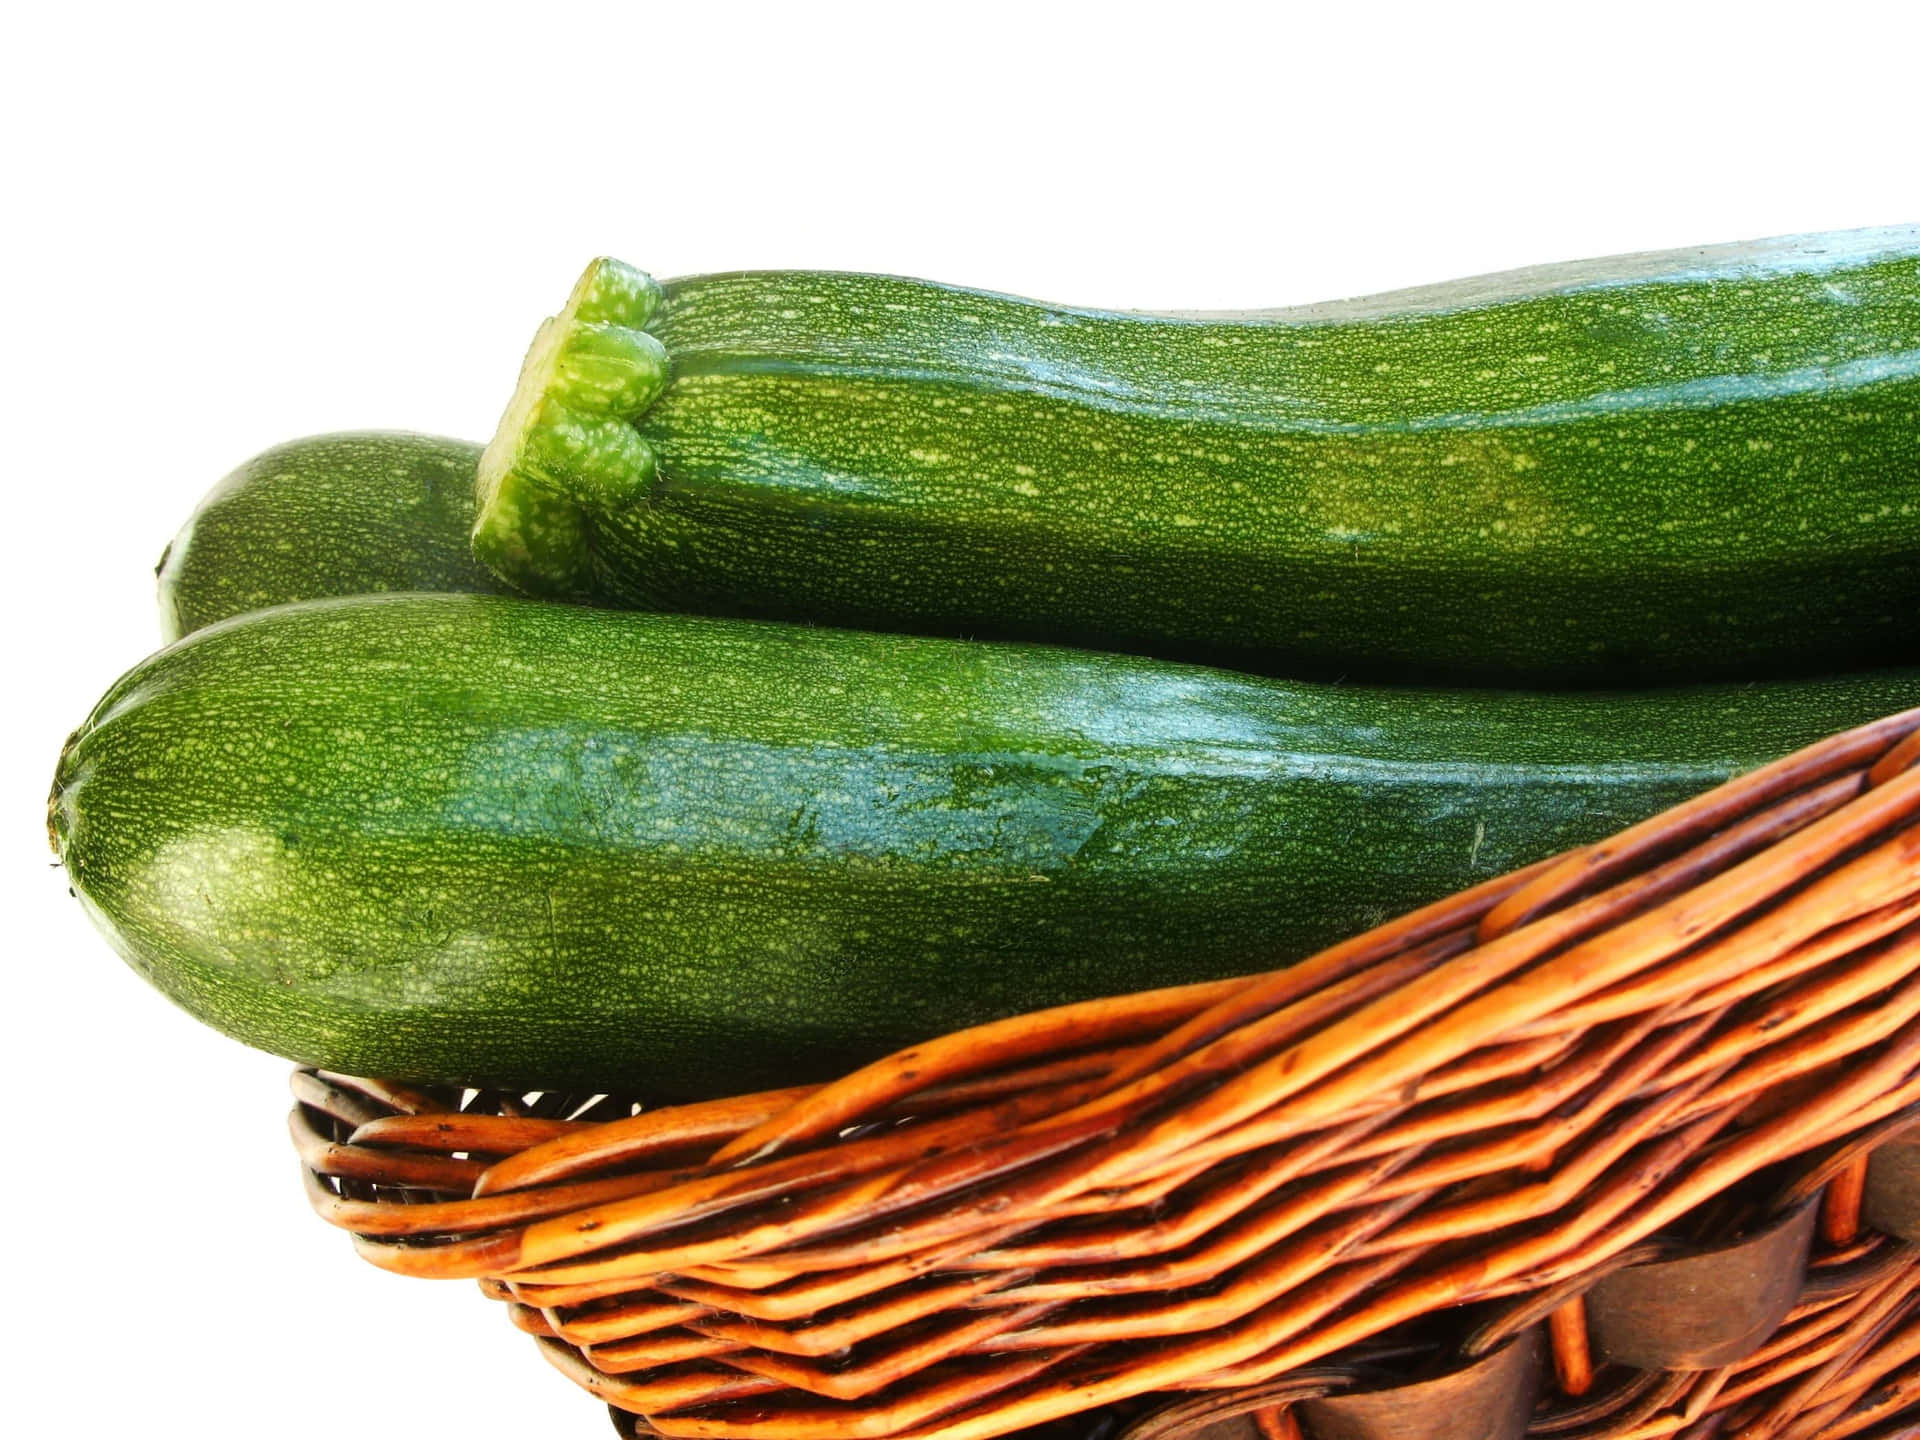 A Wicker Basket With Two Zucchinis In It